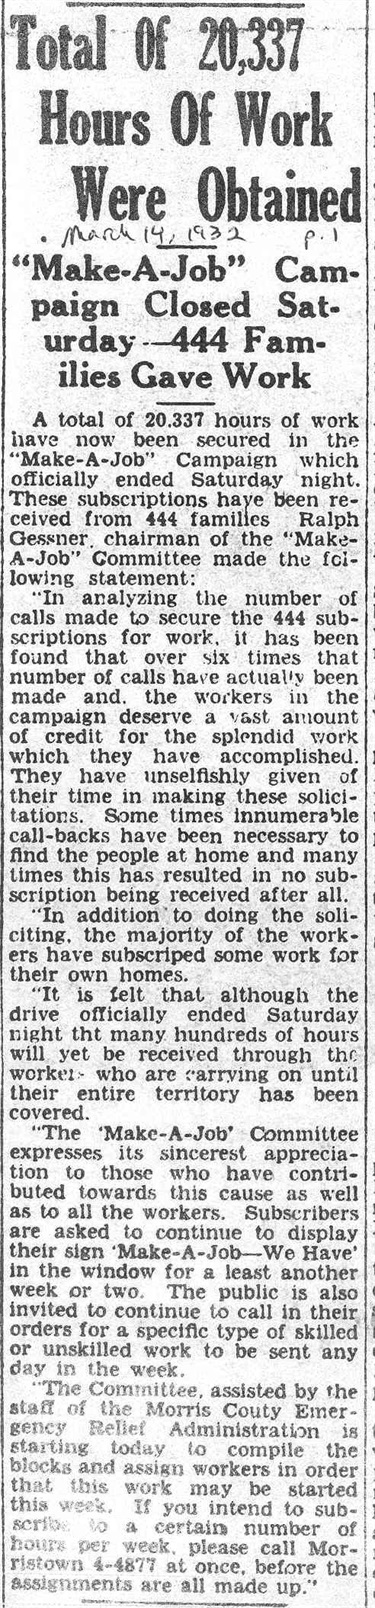 March 14, 1932: Total of 20,337 Hours of Work Were Obtained